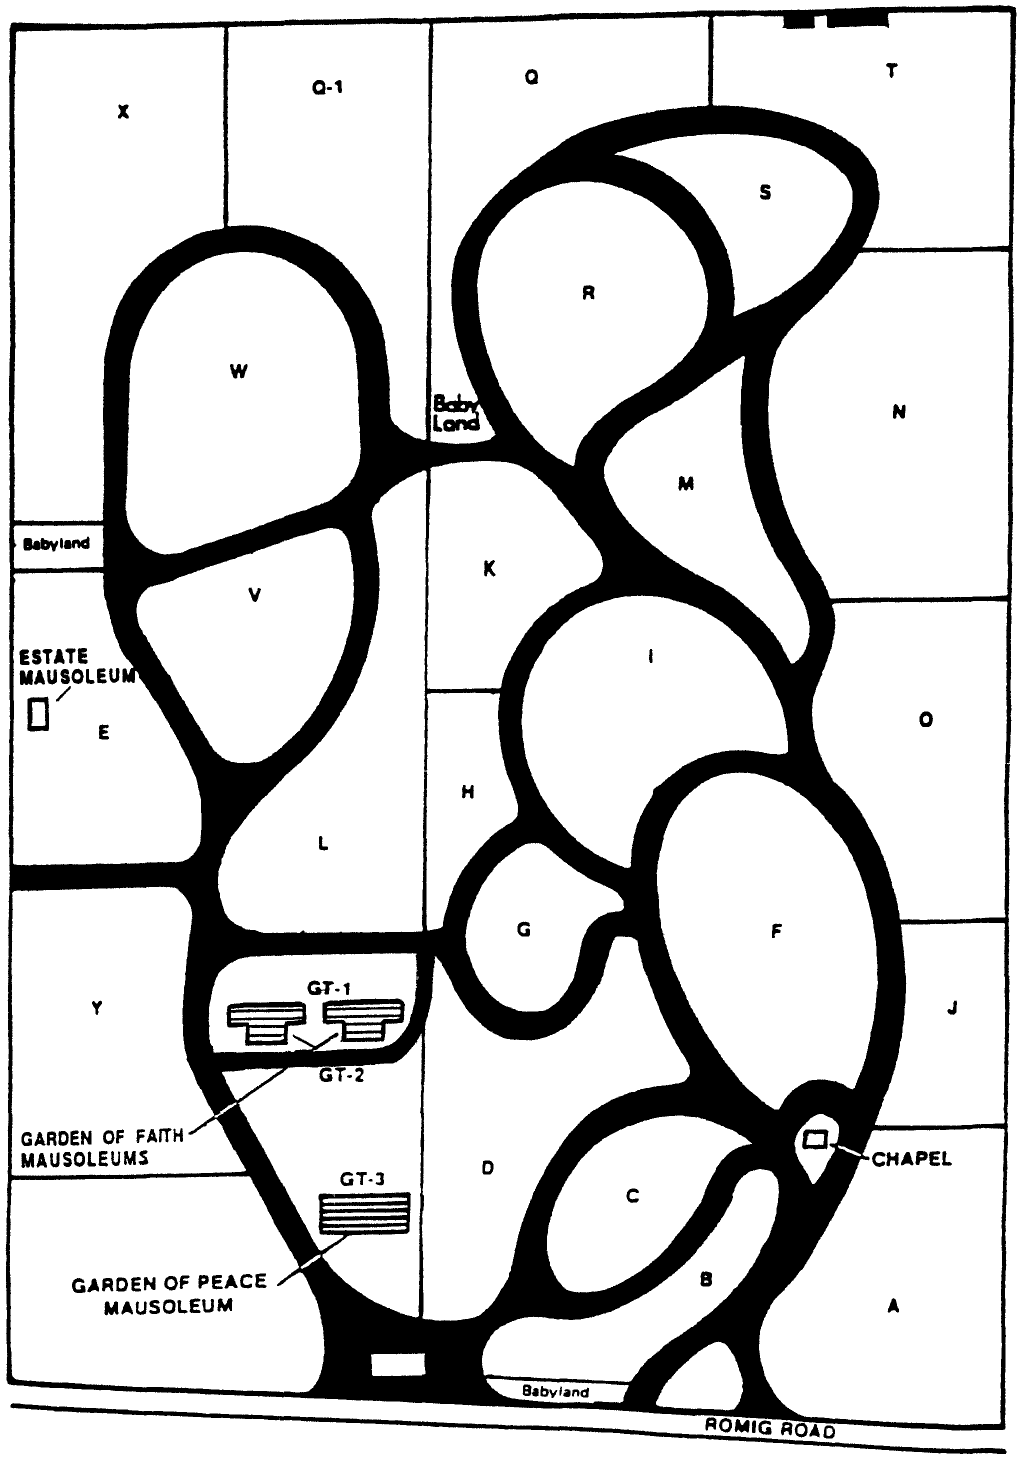 Map of the cemetery grounds